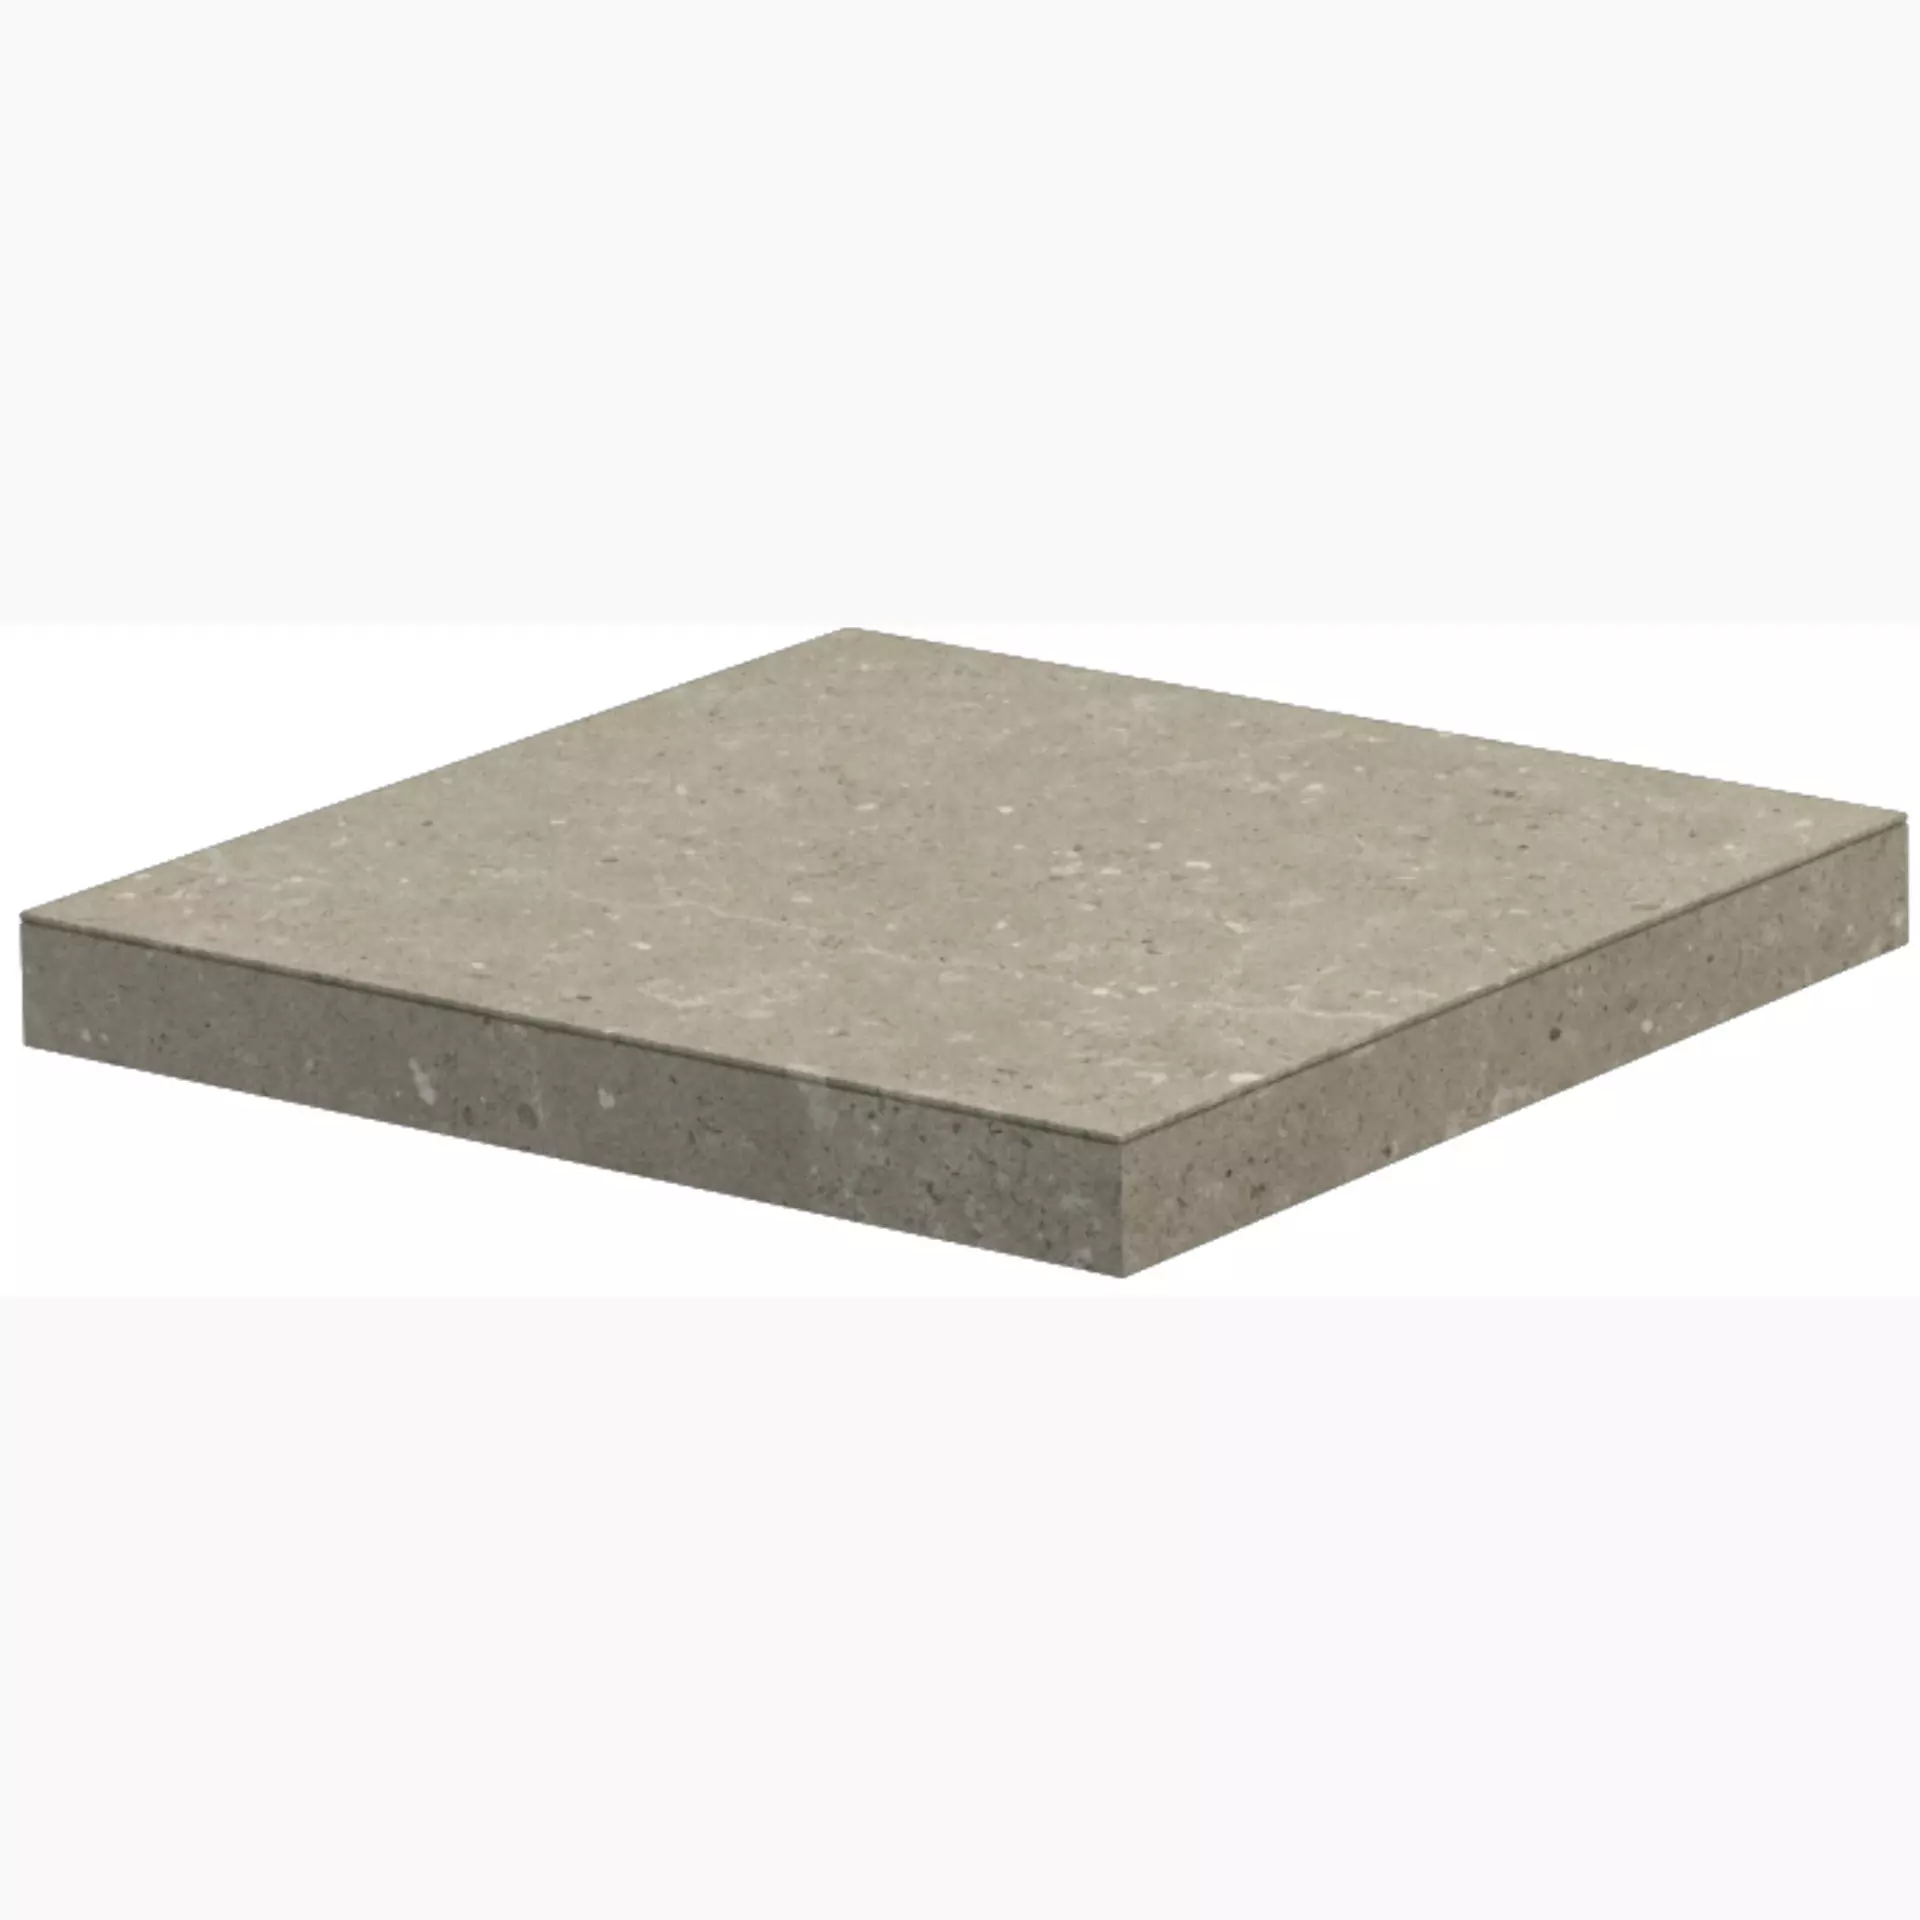 Del Conca Hwd Wild Greige Hwd11 Naturale Corner plate Step Left G3WD11RGS 33x33cm rectified 8,5mm